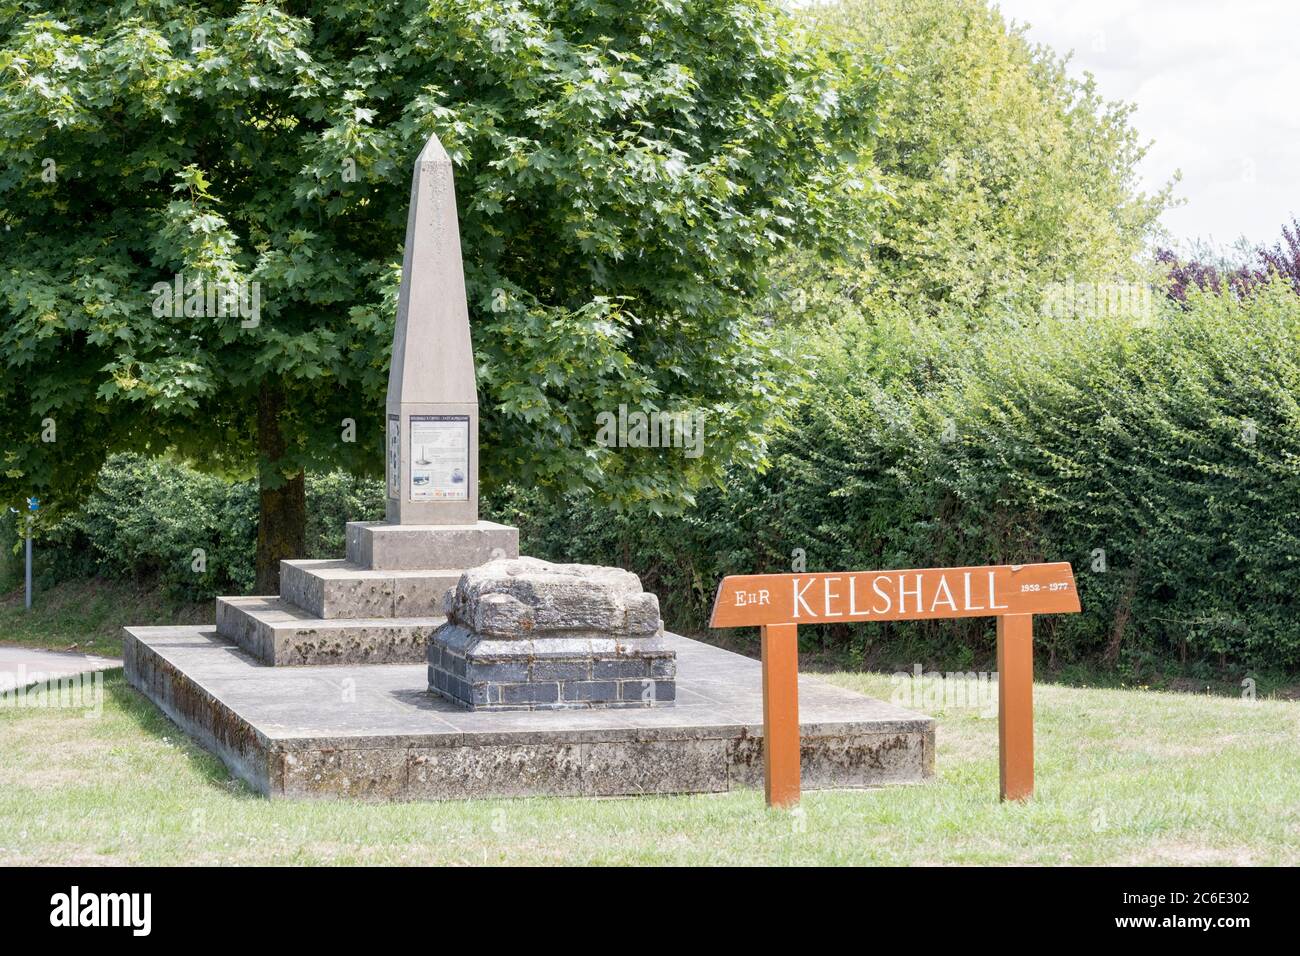 The old Cross Base and the new Millennium Cross, Kelshall, Hertfordshire. Stock Photo